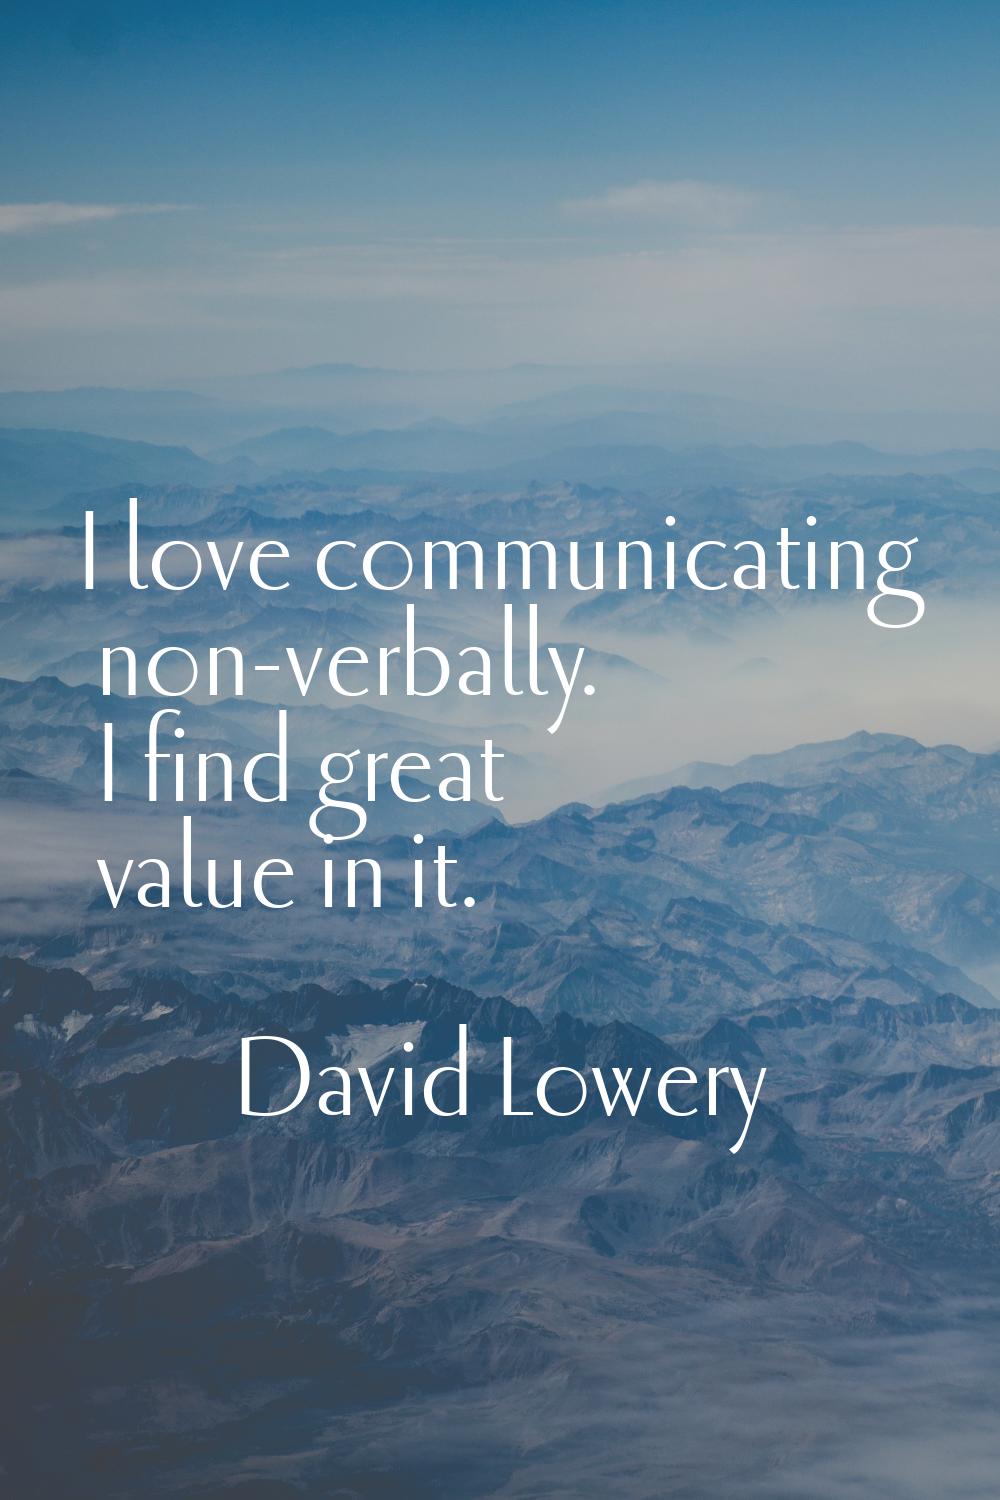 I love communicating non-verbally. I find great value in it.